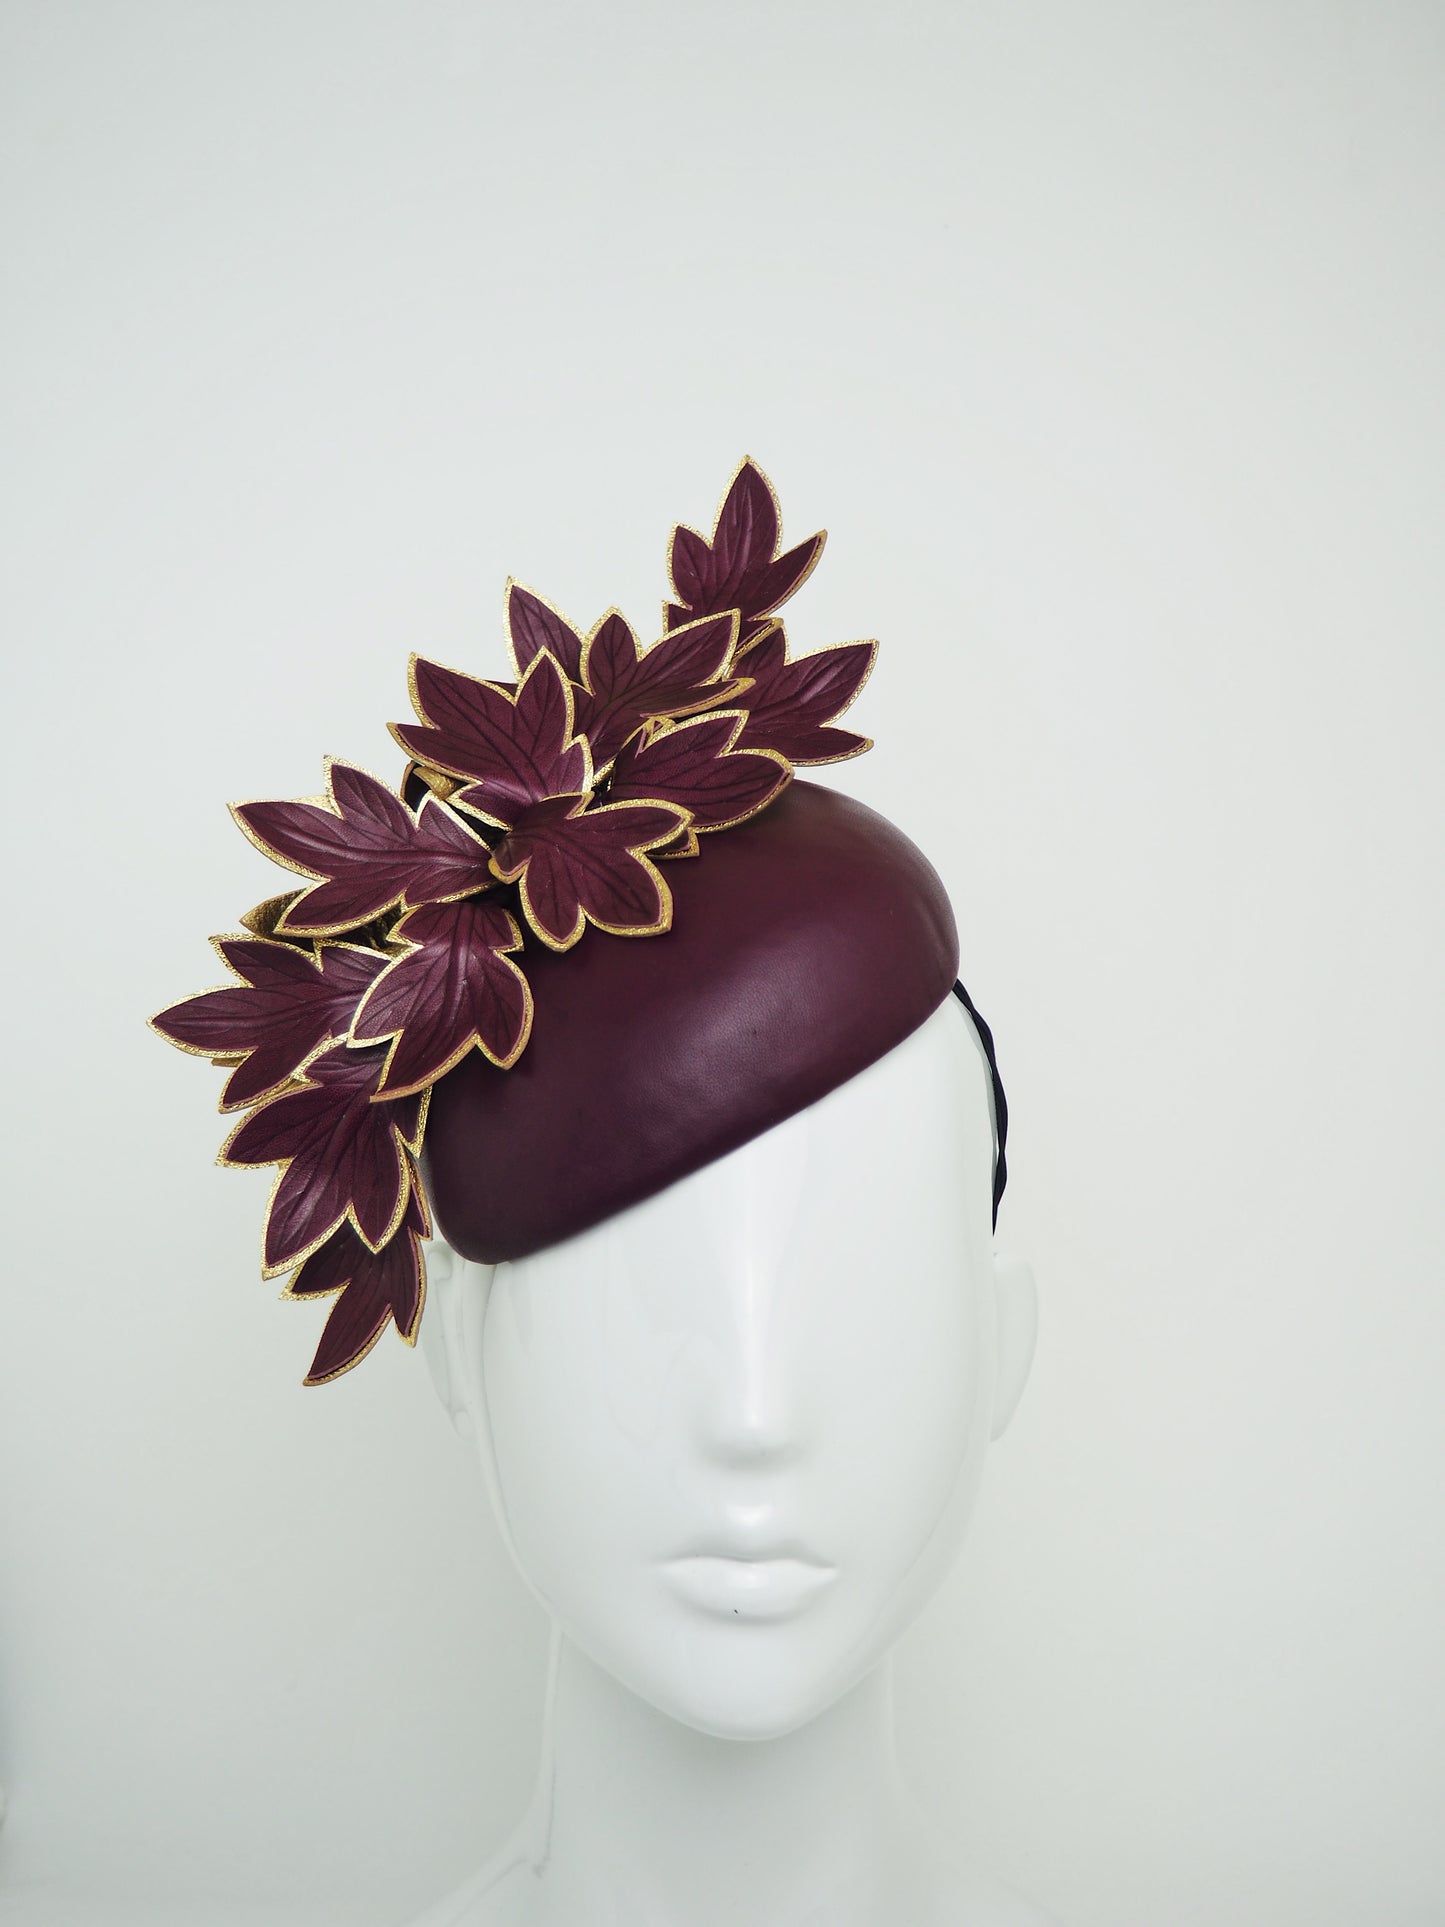 Maroon Maven - Small maroon base with maroon and gold leaves